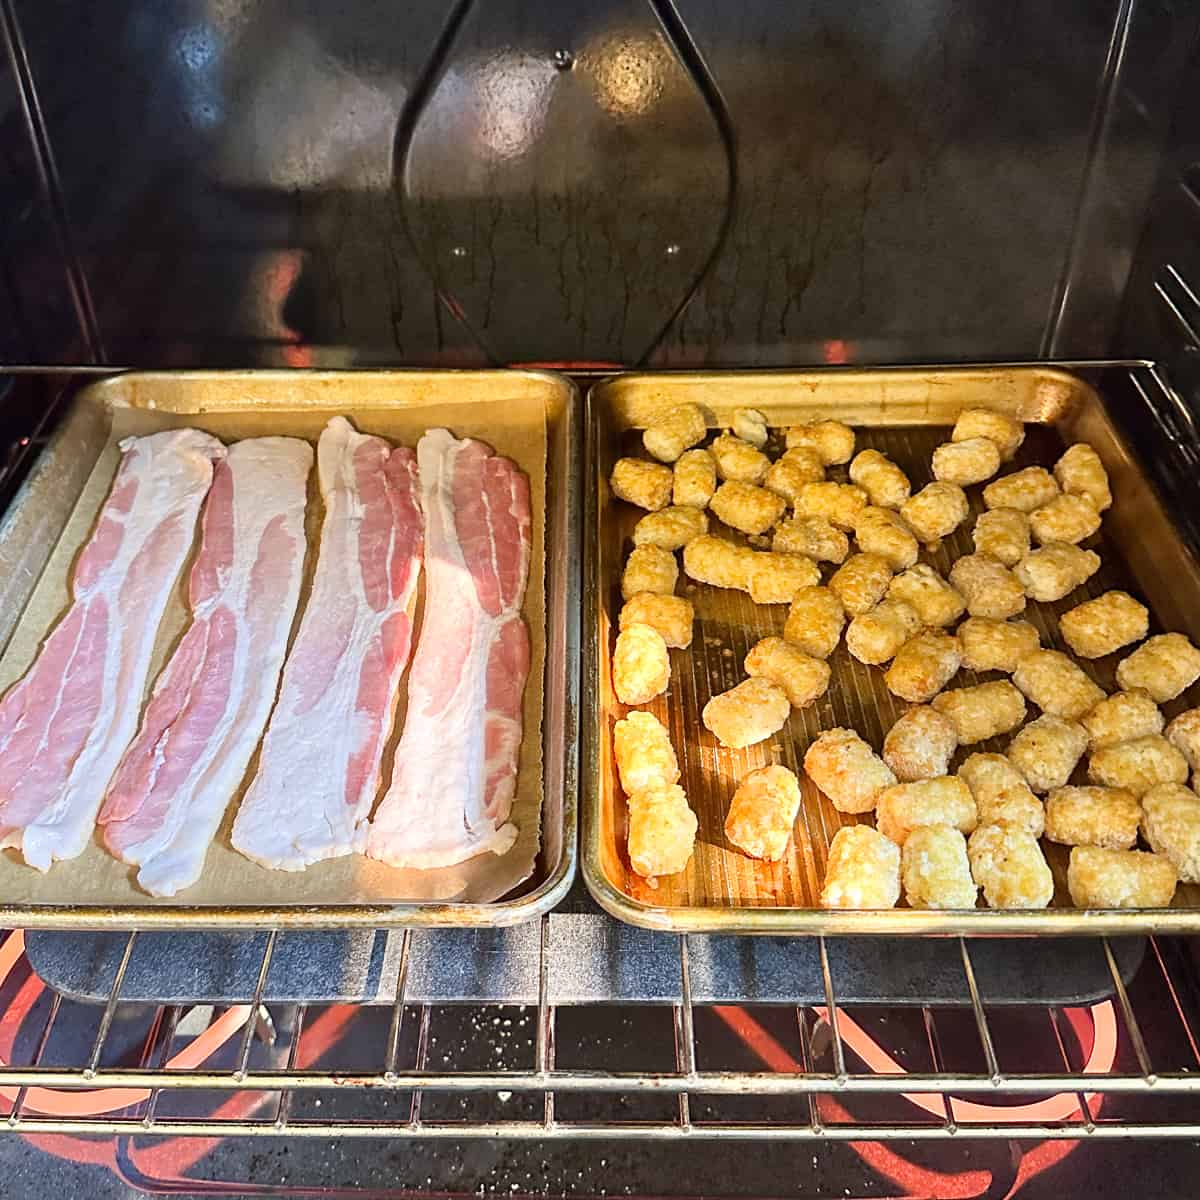 placing bacon and tater tots in the oven to bake.